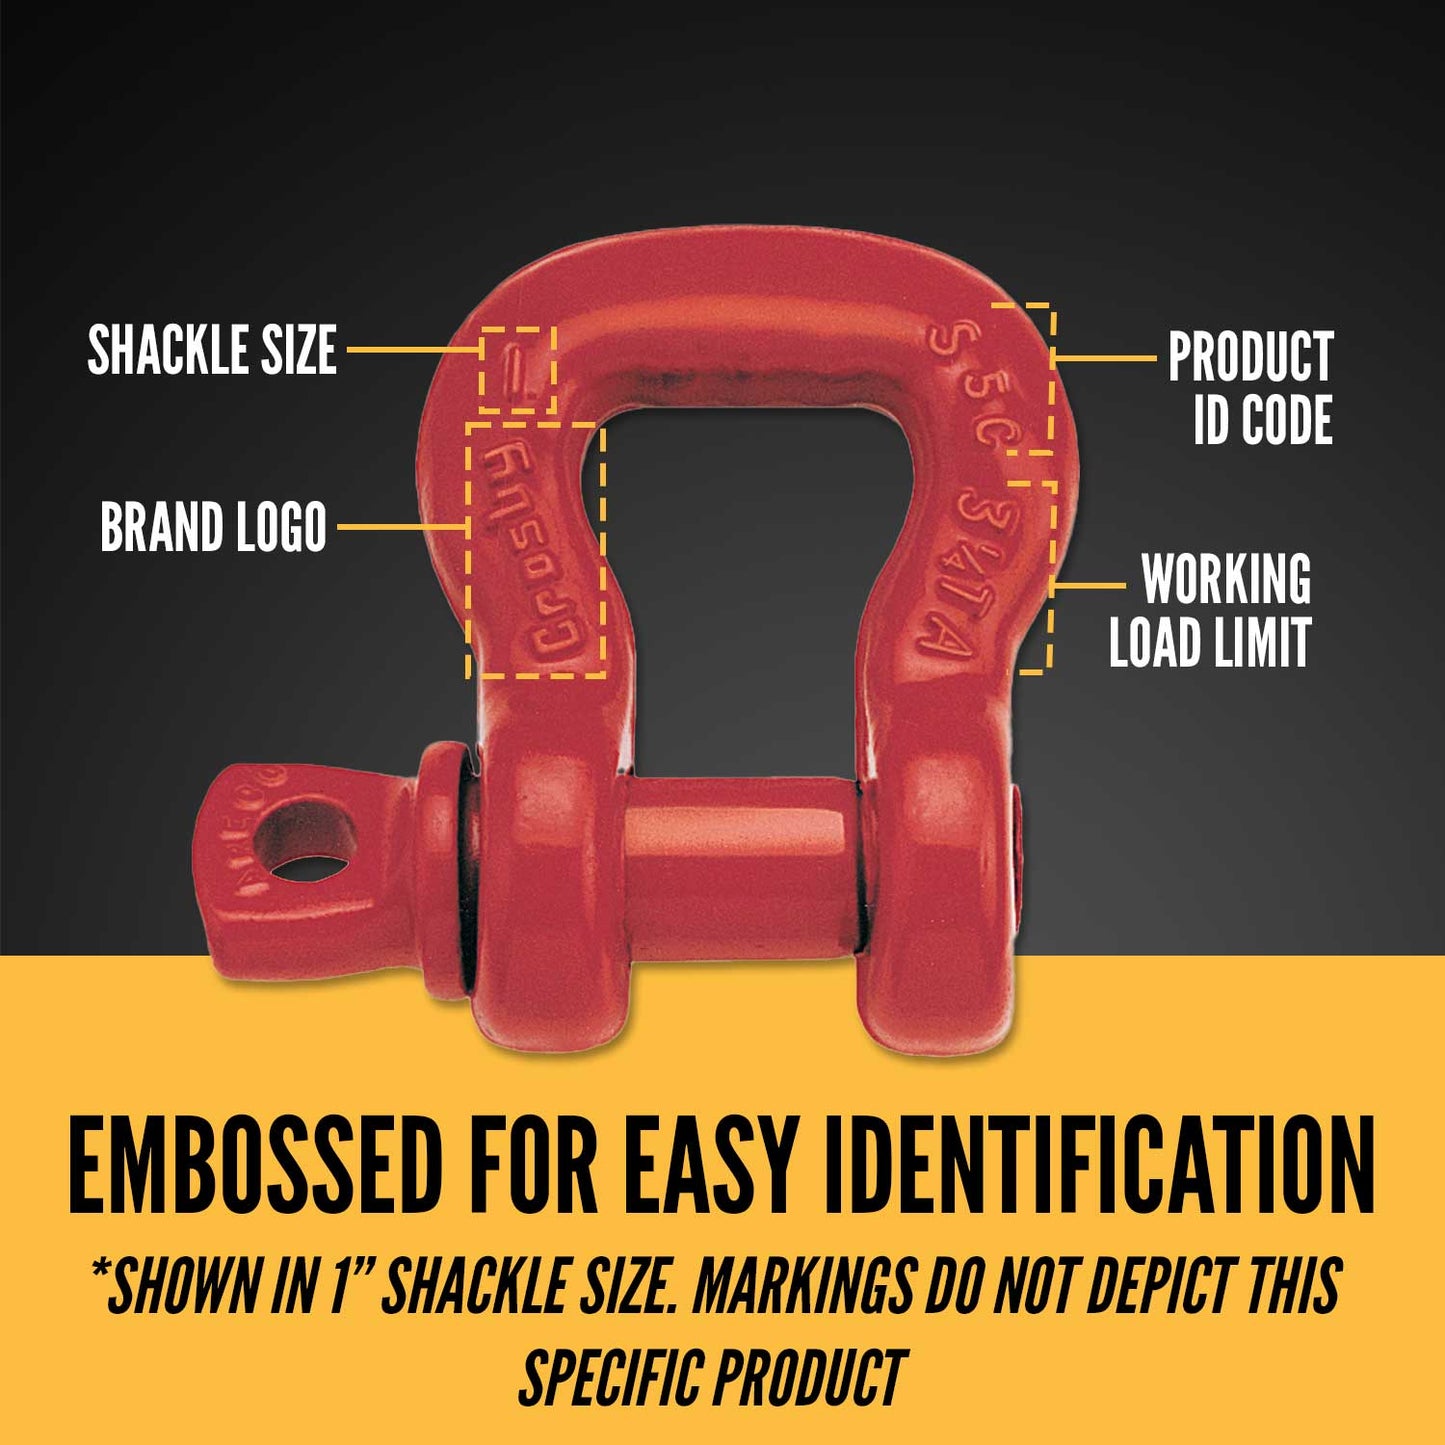 Crosby® Screw Pin Sling Saver Shackle | S-253 - 2"- 8.75 Ton embossed for easy identification